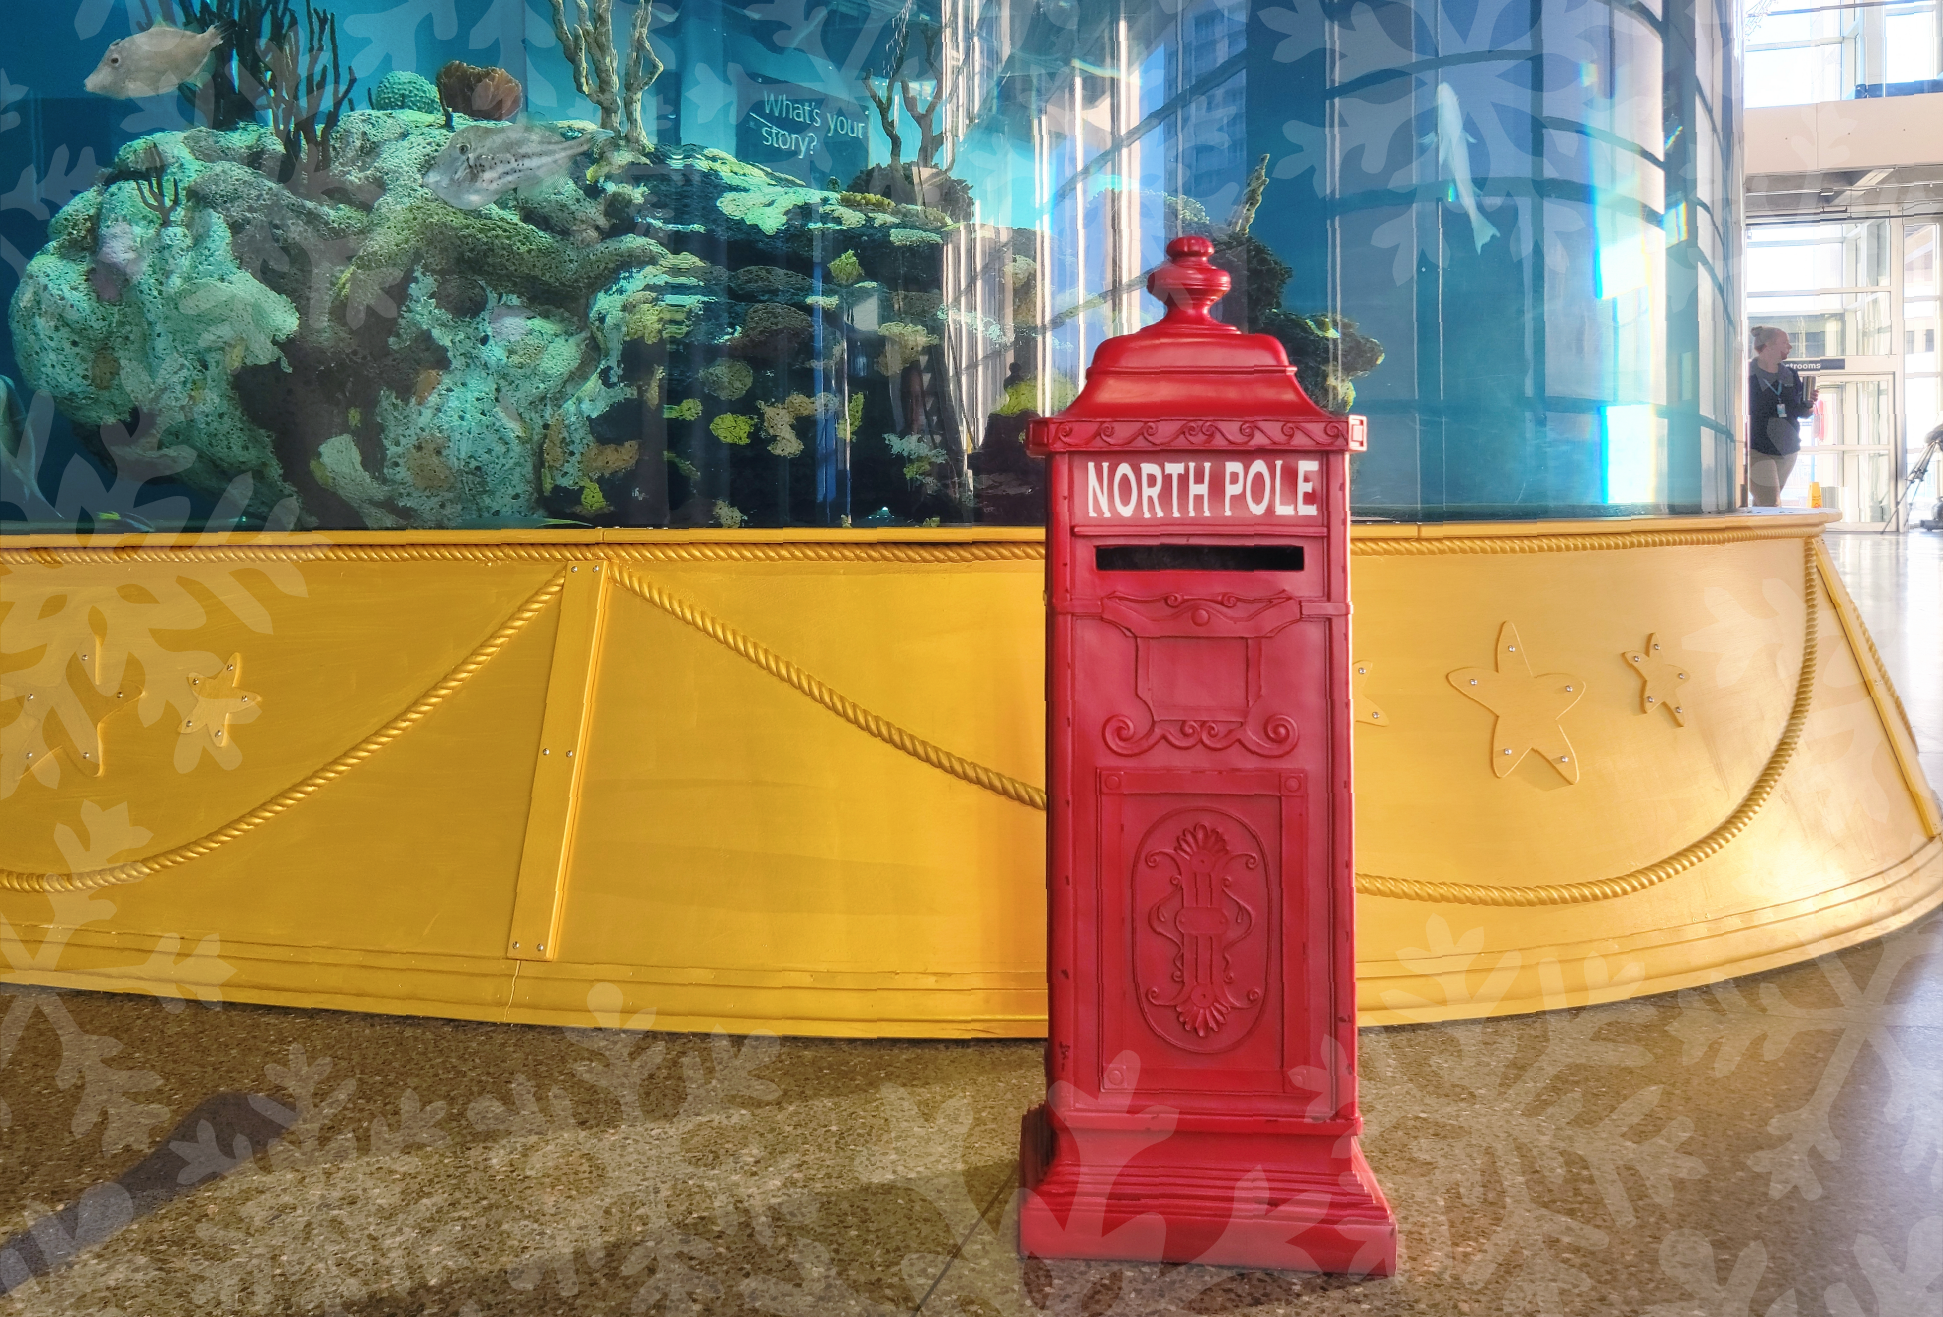 a red mailbox labeled "North Pole" sits in front of the Carolina Seas exhibit